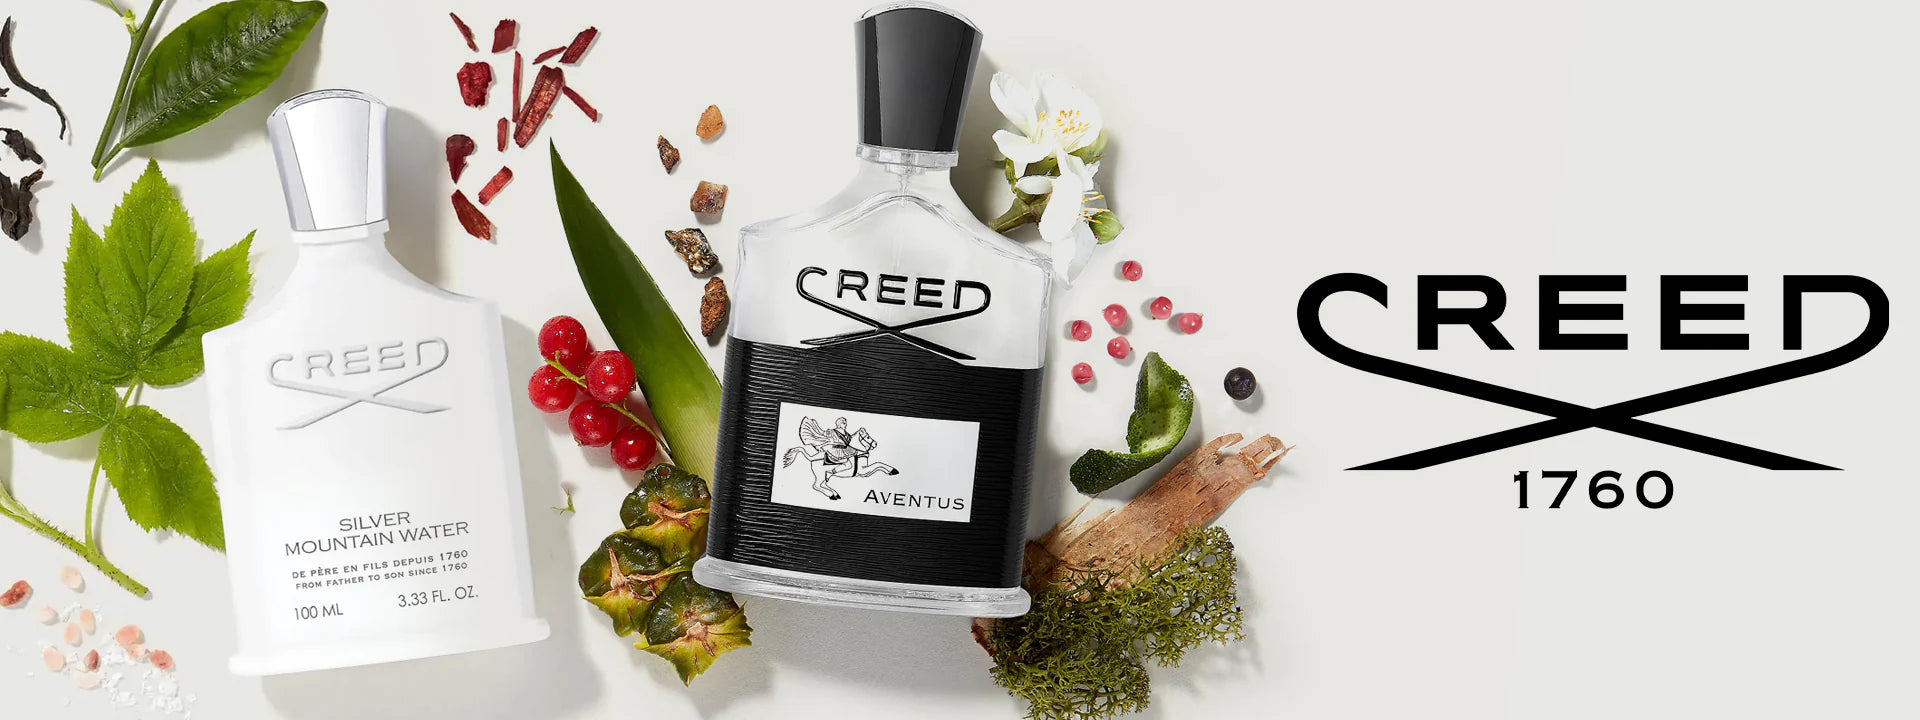 creed aventus and creed silver mountain water